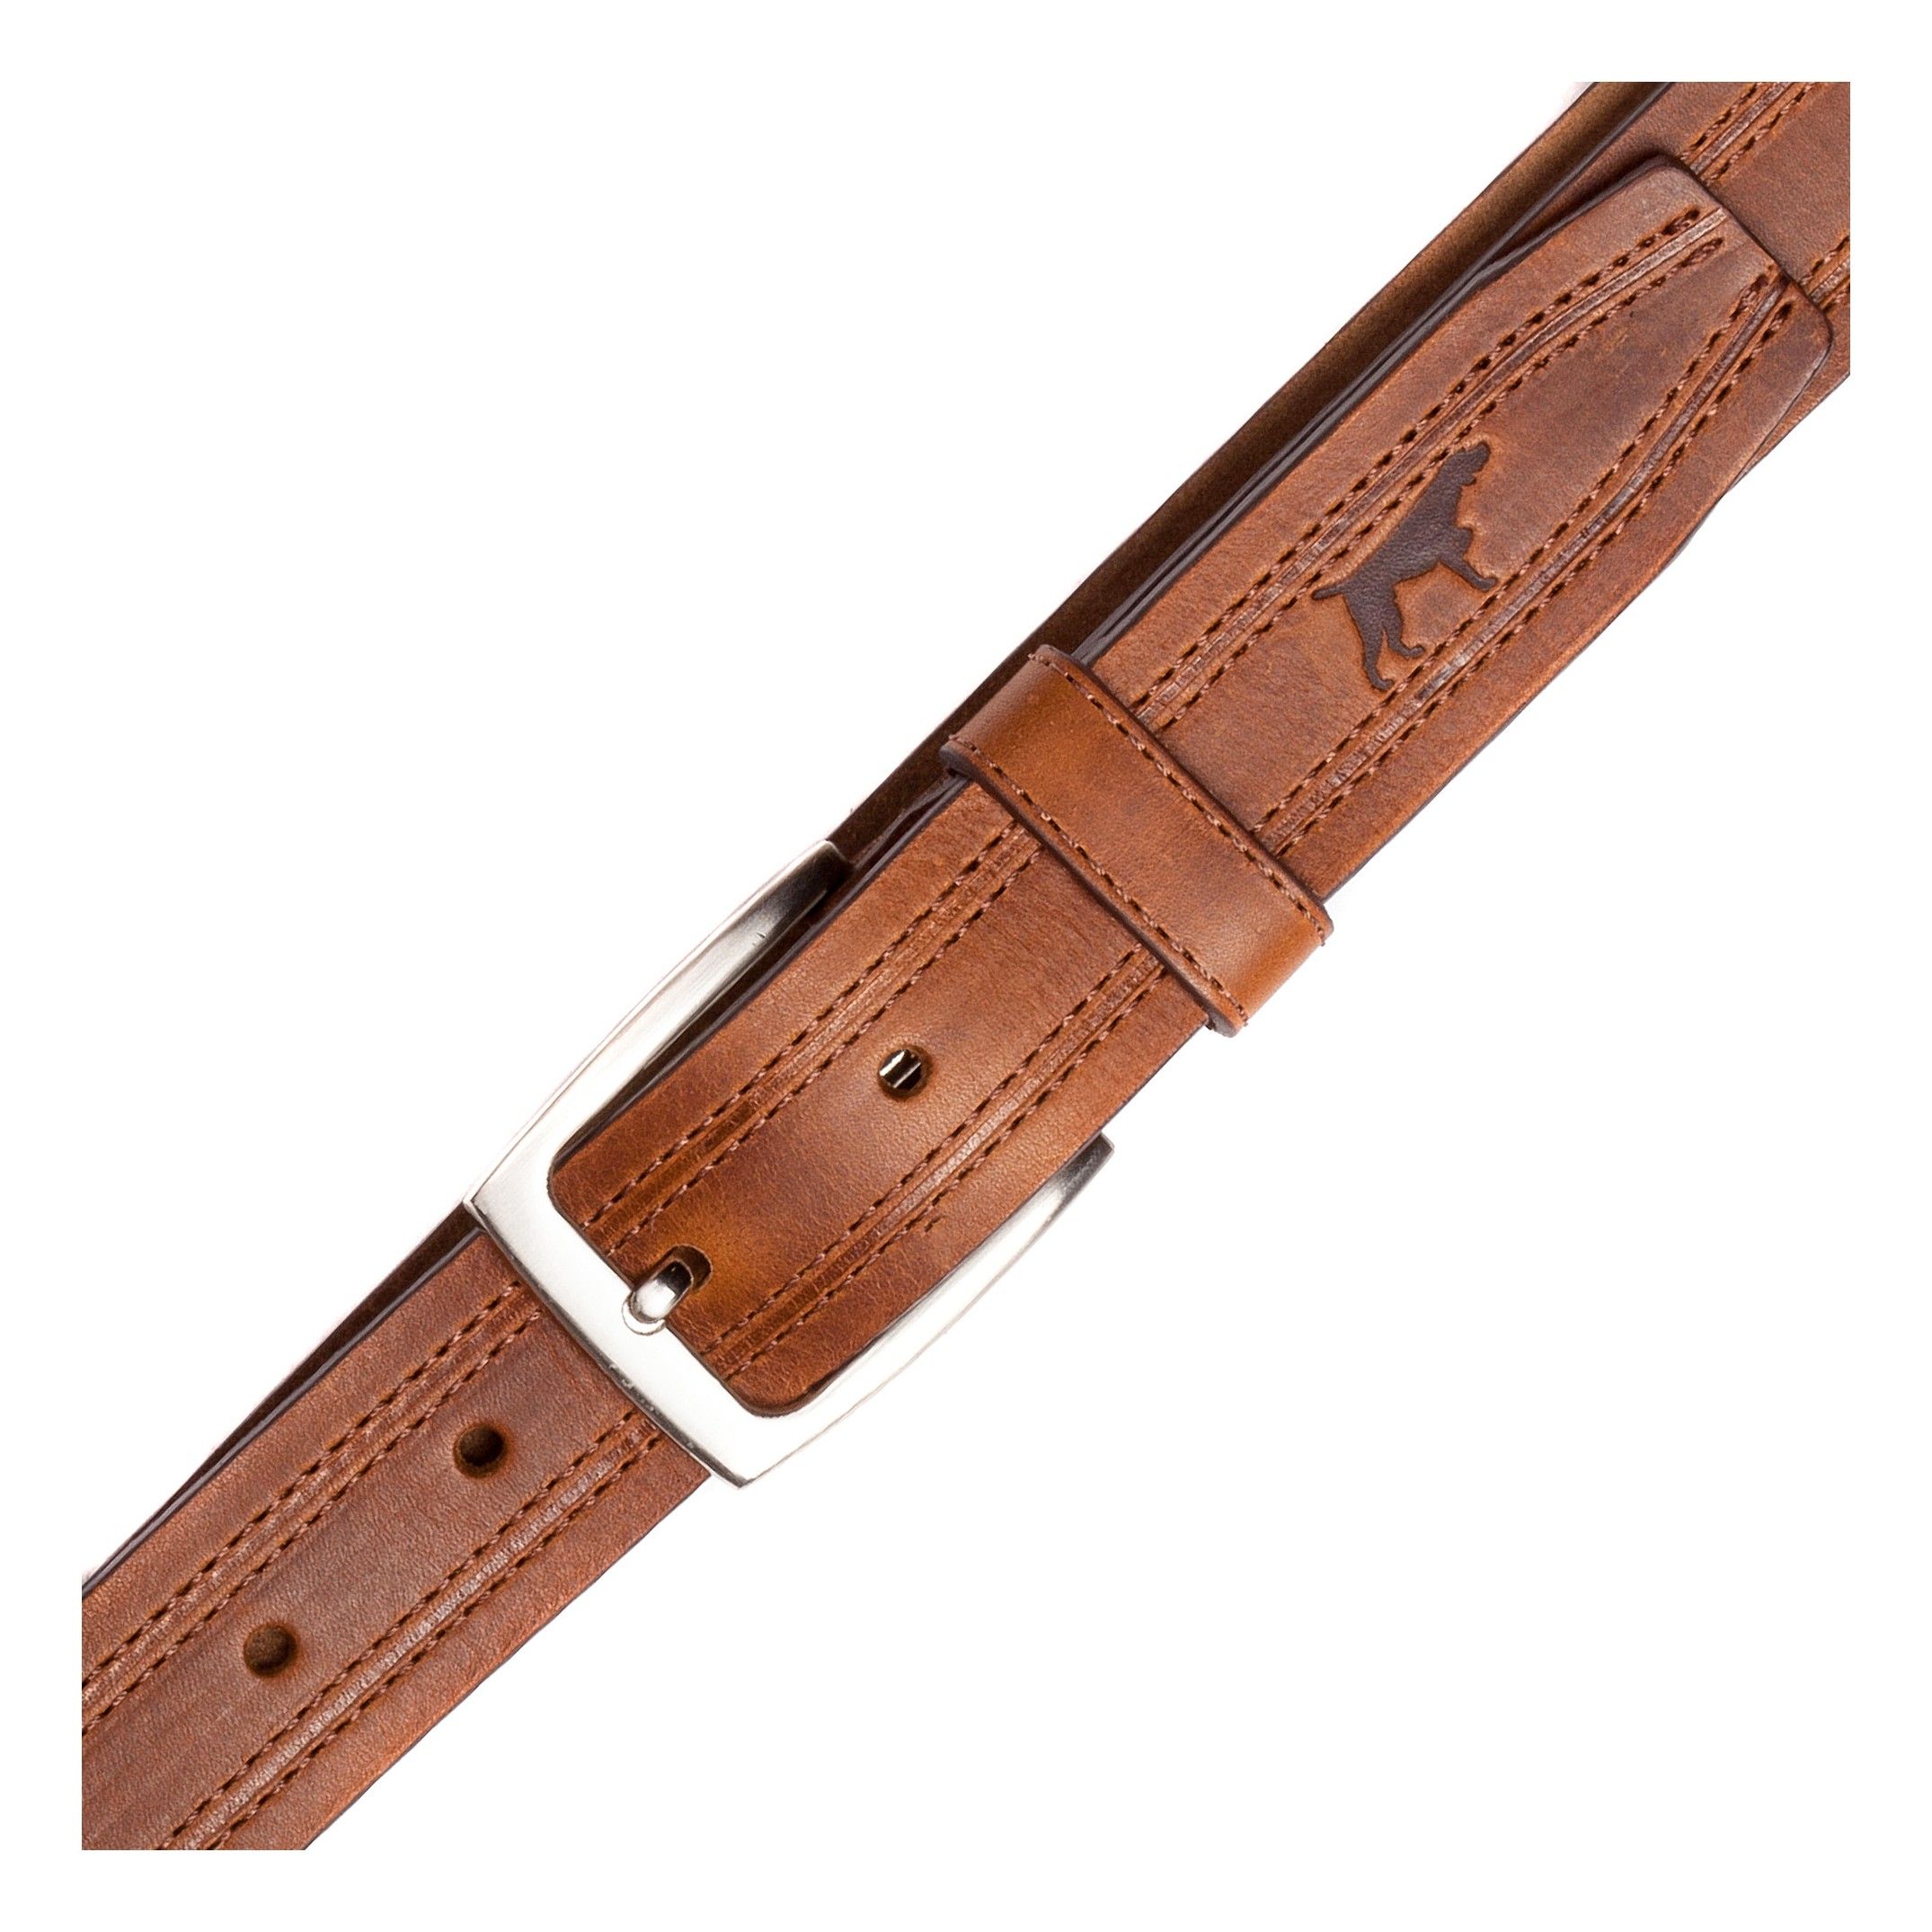 Special belts to wear in casual and formal occasions. Leather belt with adjustable closure. Different colors to wear this season. Made in Spain.